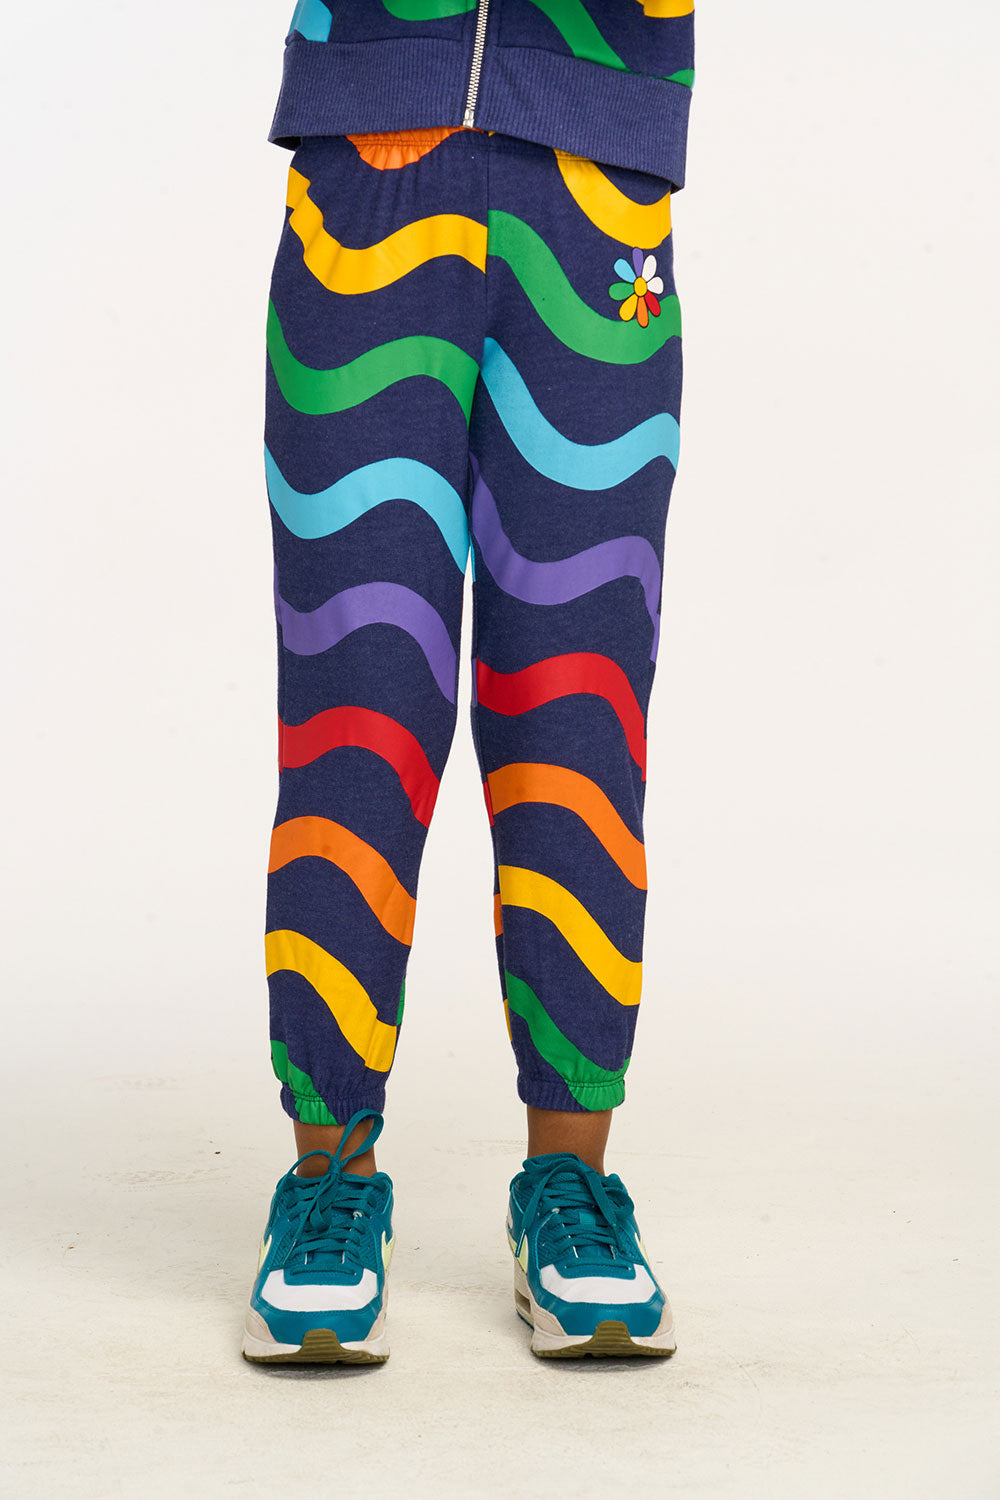 Wavy Rainbow Slouchy Pant GIRLS chaserbrand